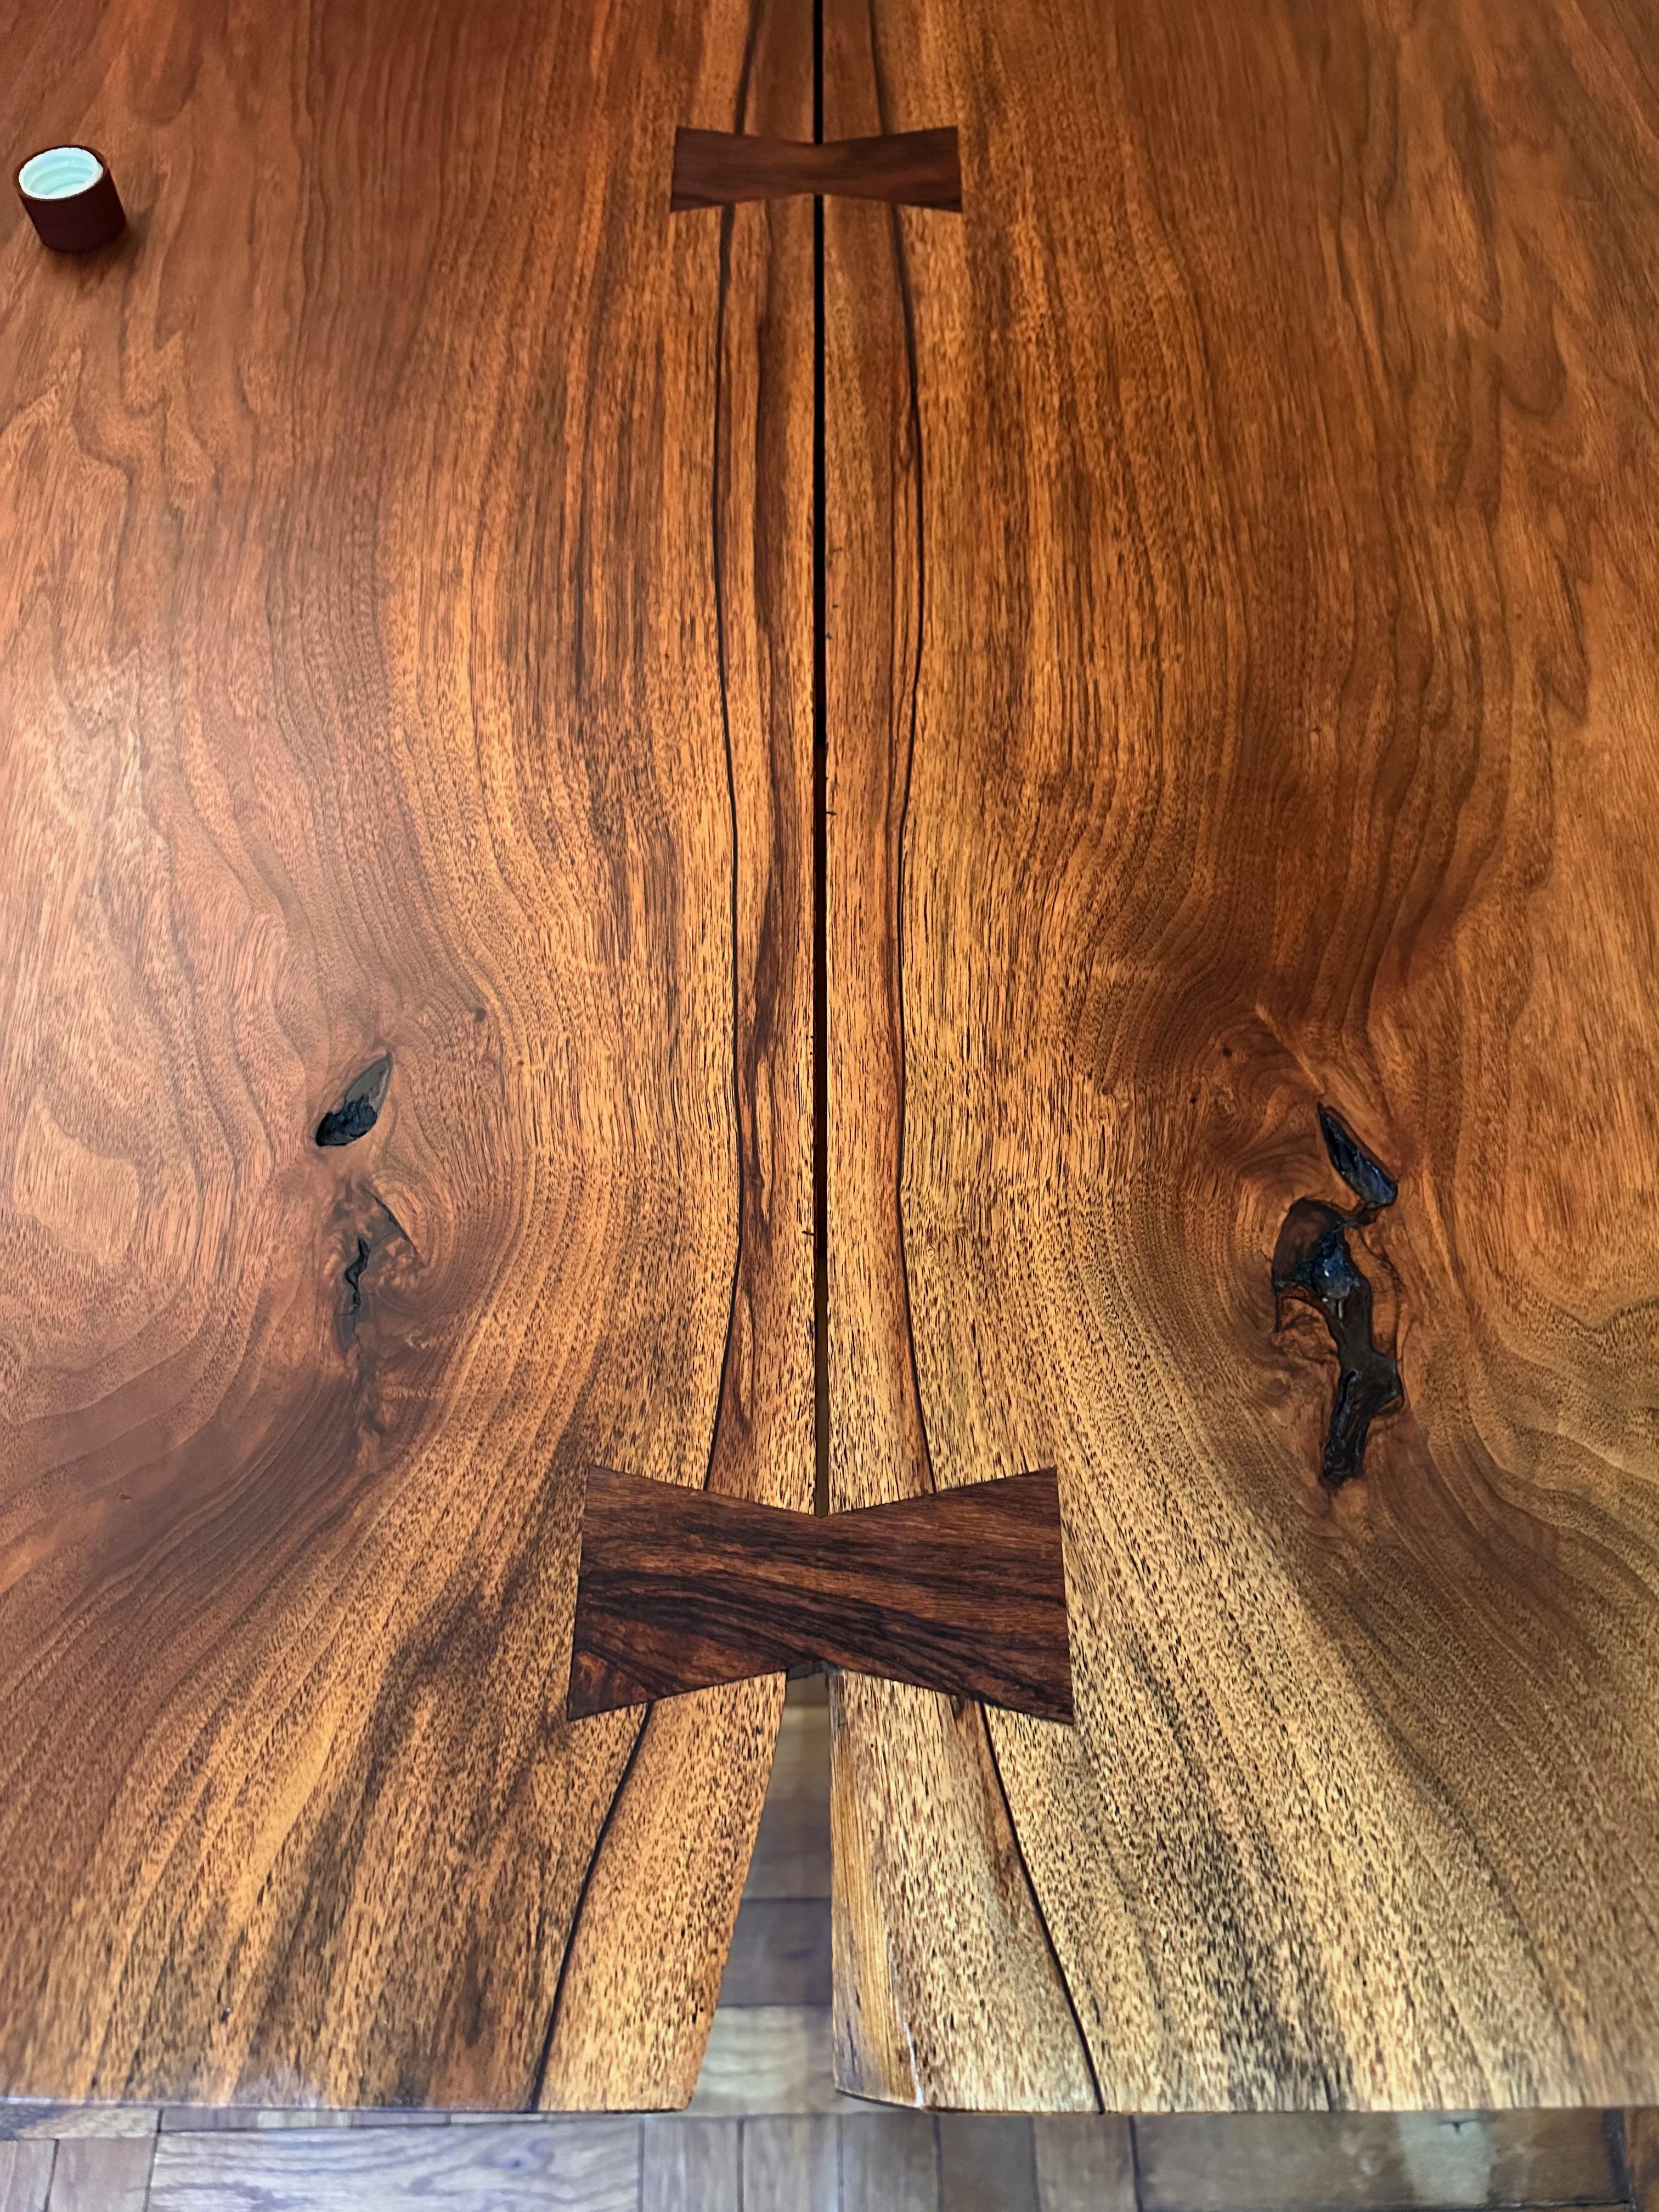 Trestle dining table: this table, built by George Nakashima in 1978, consists of bookmatched solid walnut boards, with five rosewood butterfly joints, The top fits precisely to the base and is secured with pegs (shown in images) The horizontal rail